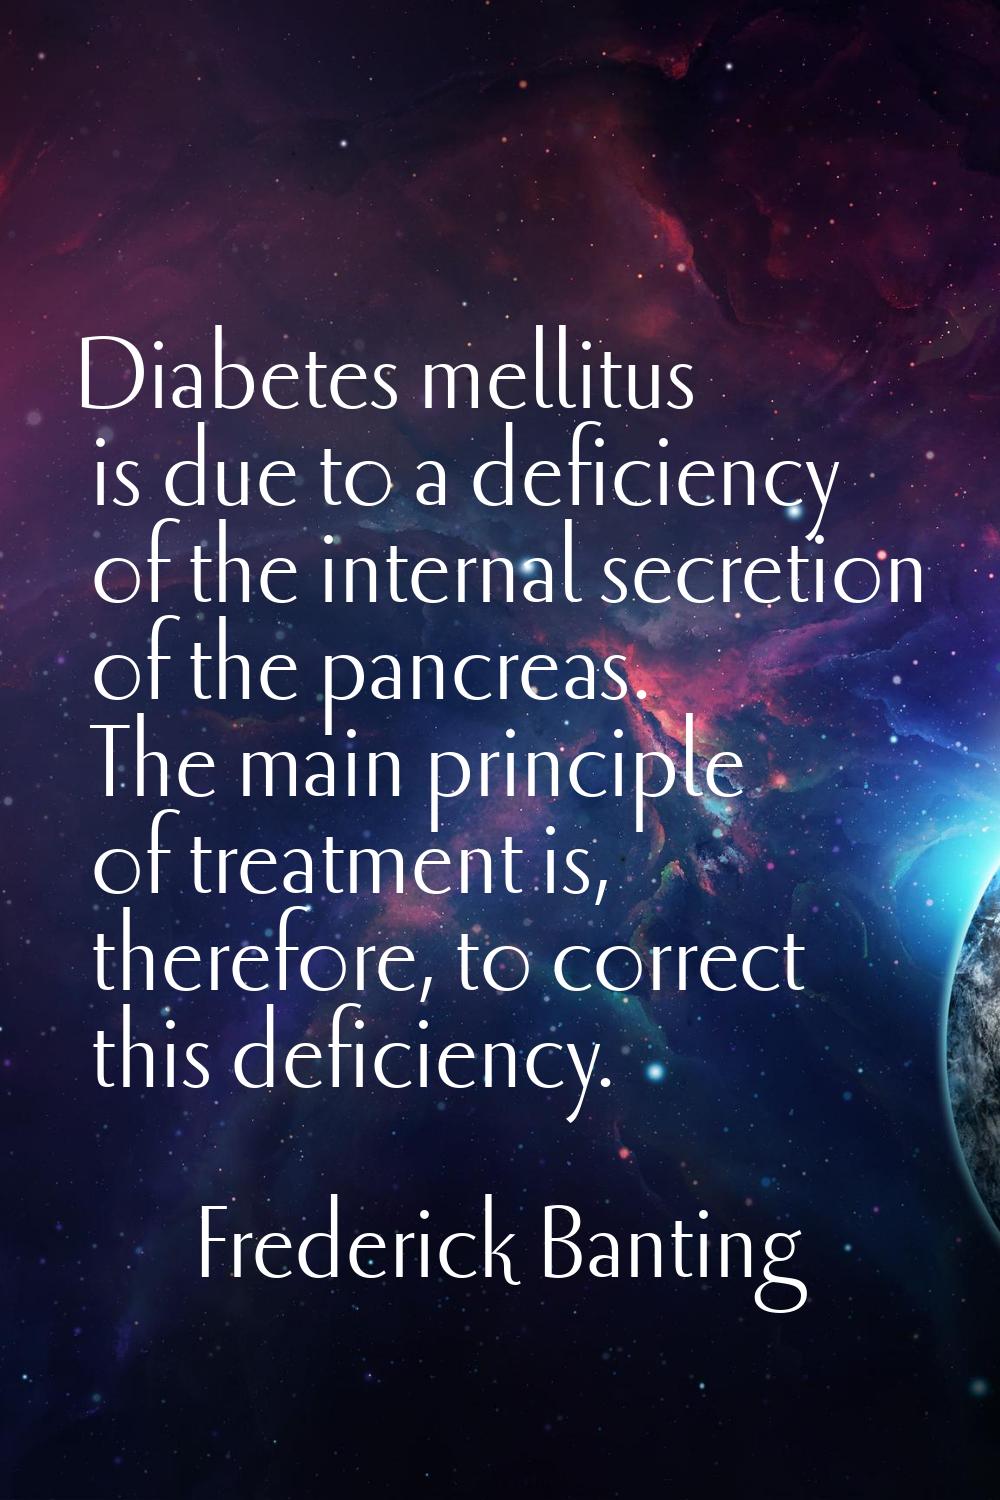 Diabetes mellitus is due to a deficiency of the internal secretion of the pancreas. The main princi